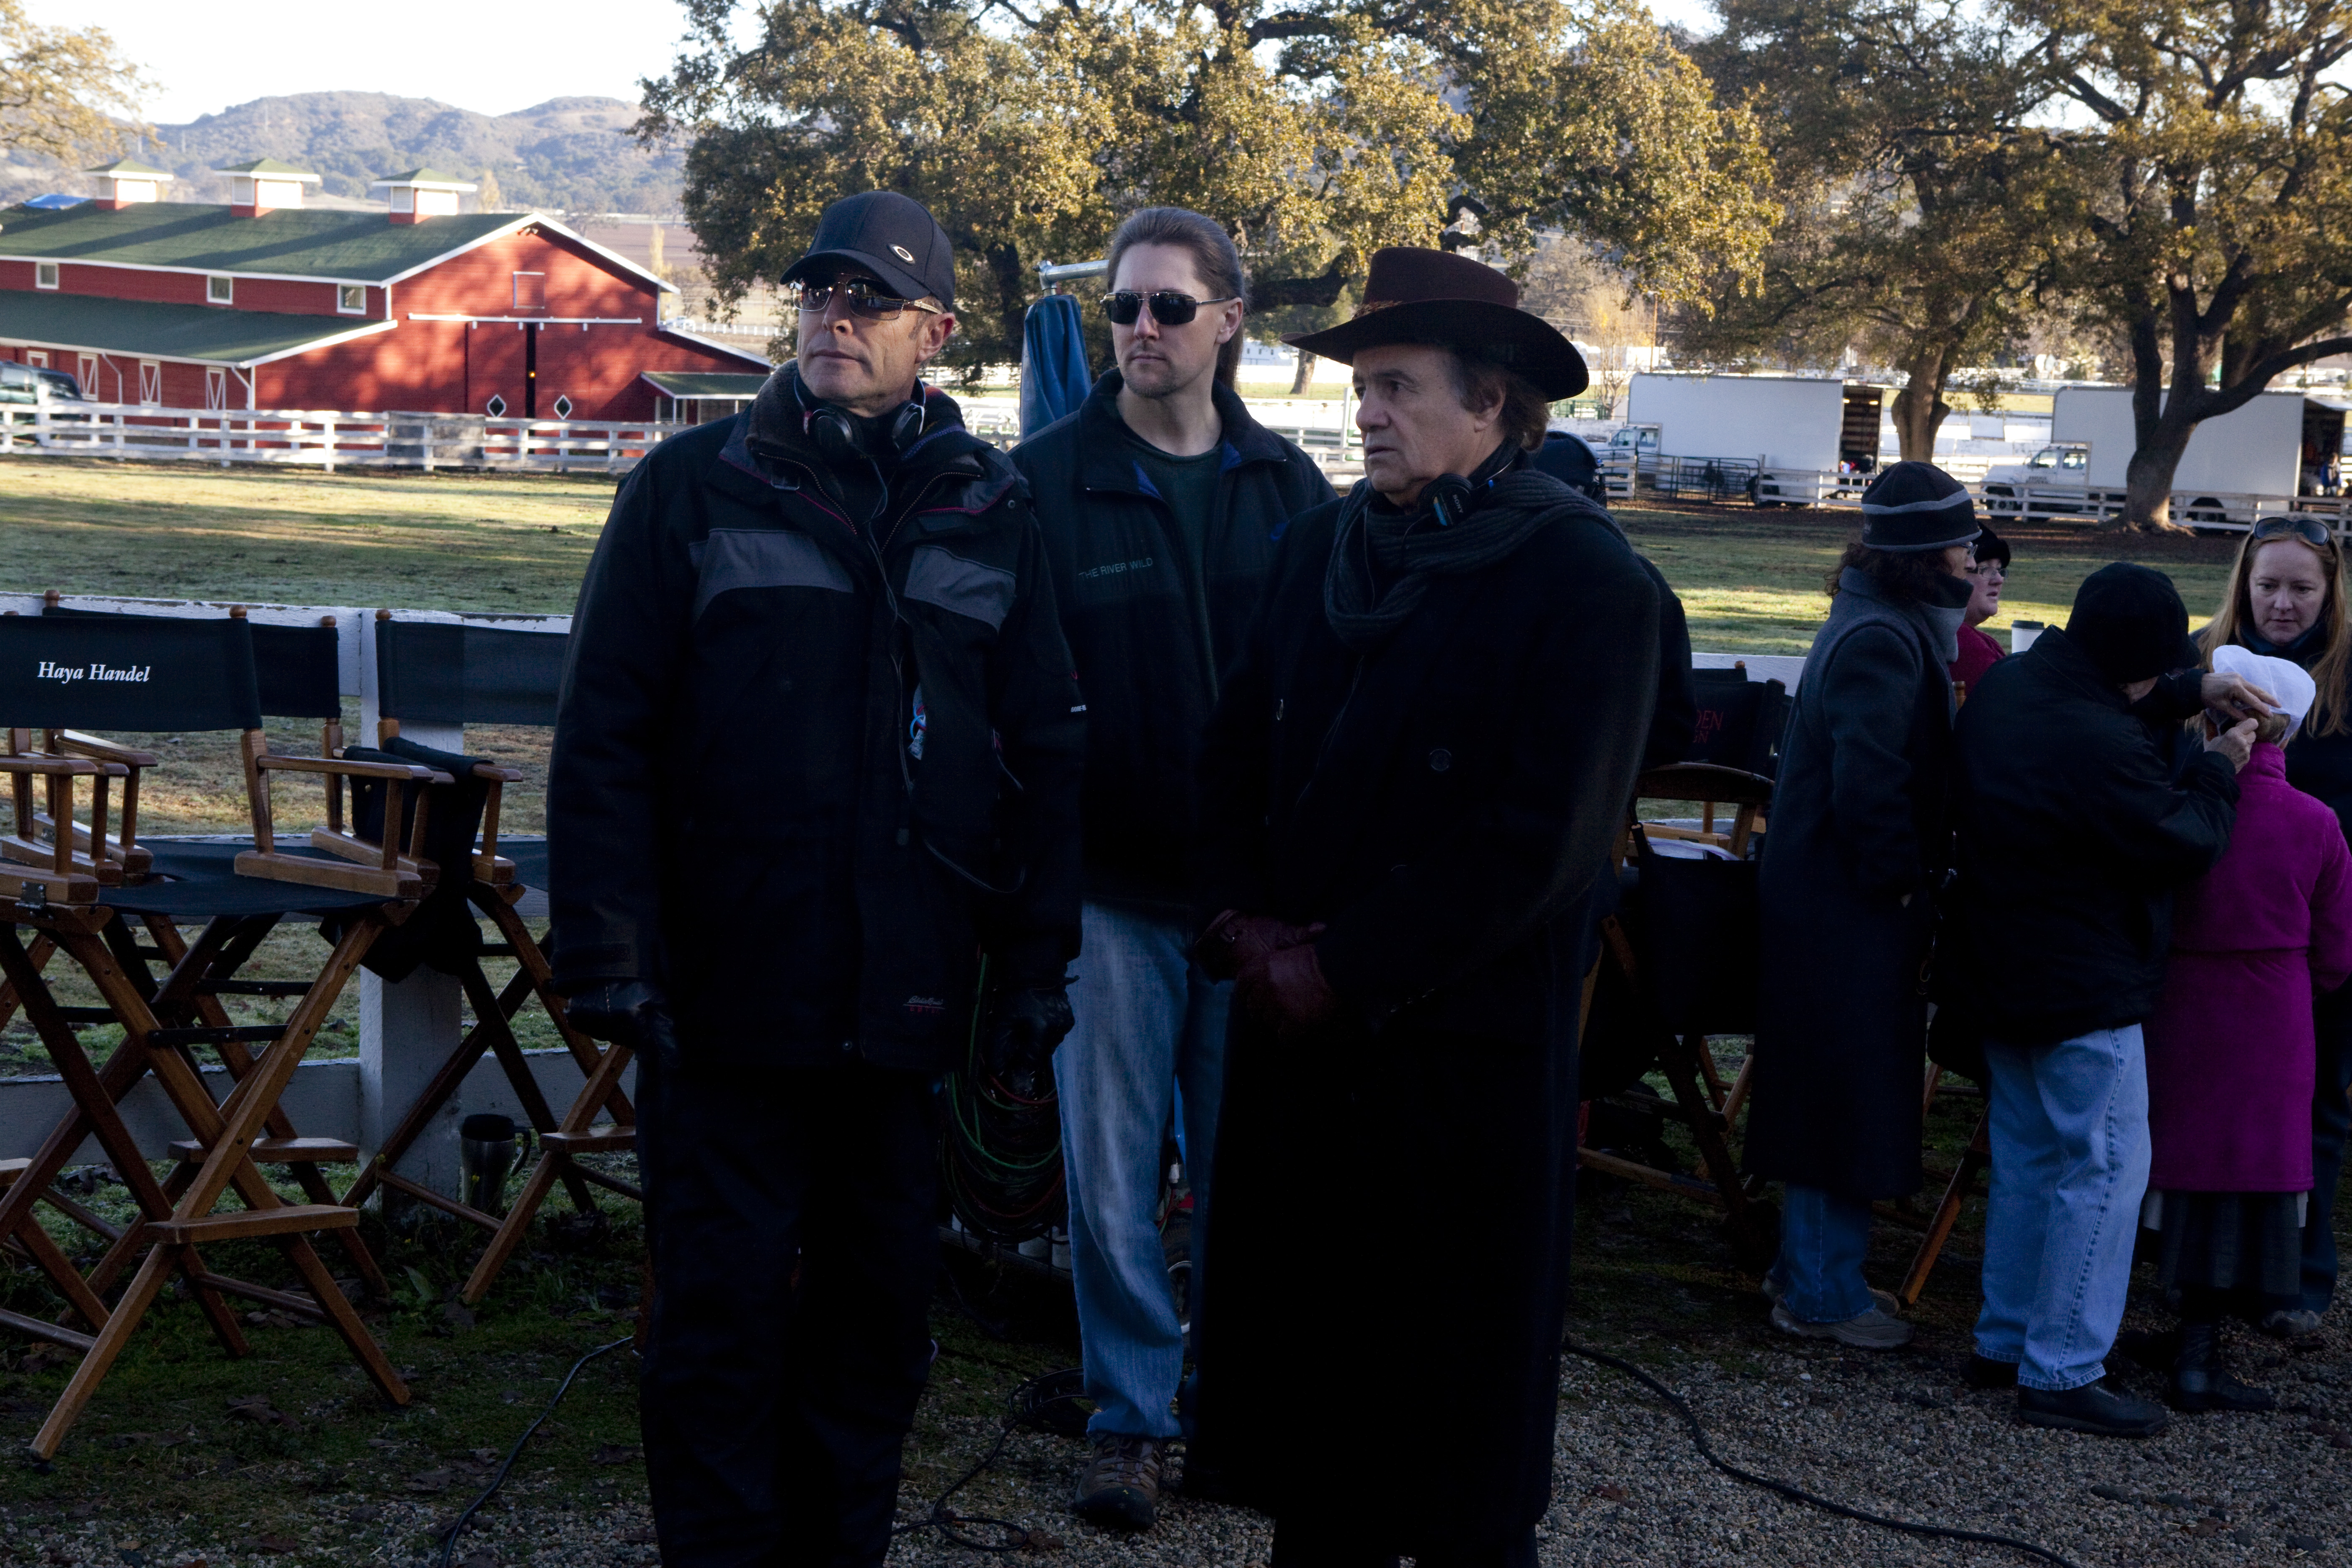 Larry A. Thompson with associate producer, Robert G. Endara II, and director, Gregg Champion, on set of 